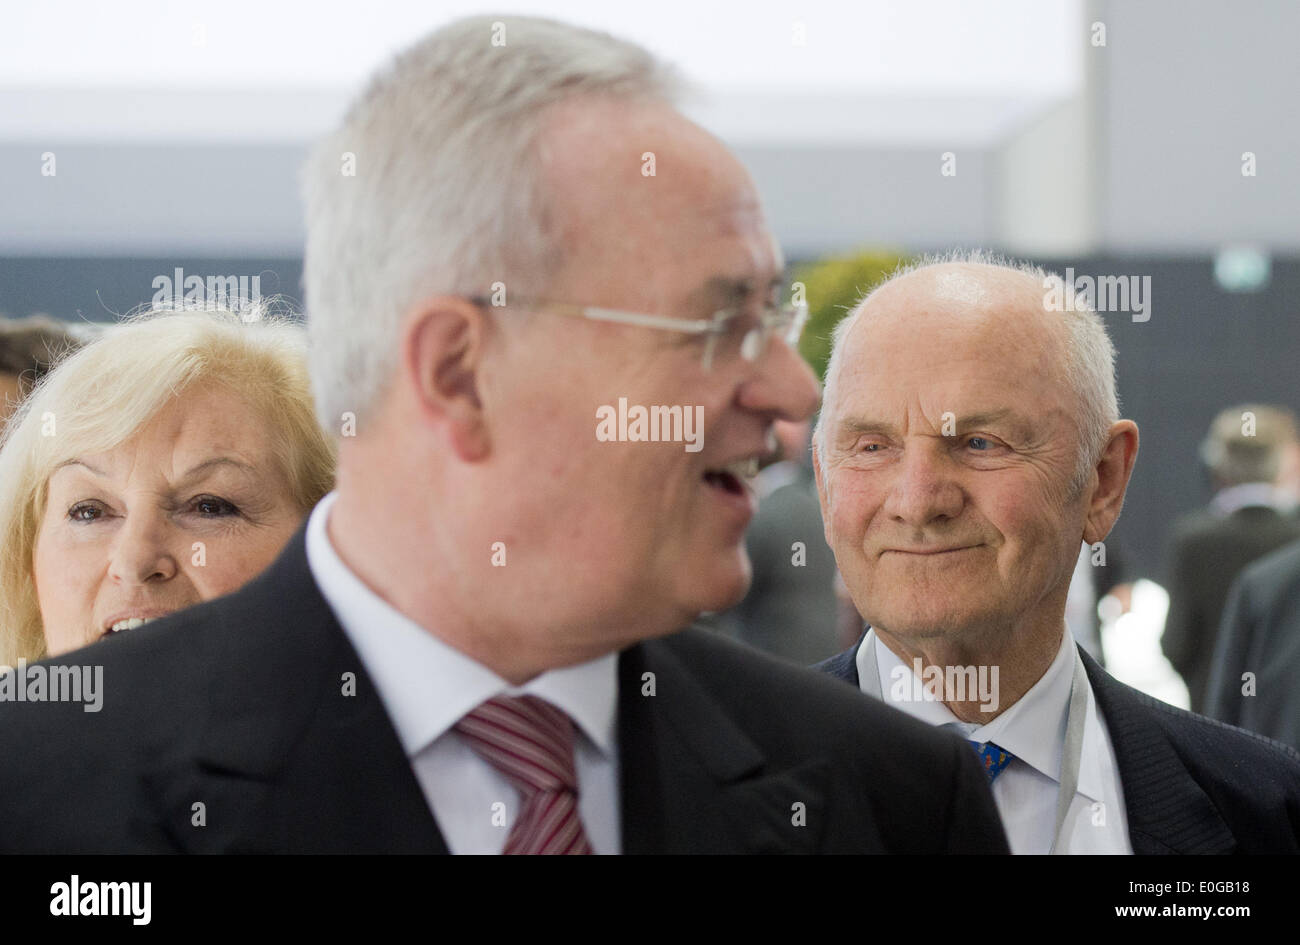 Hanover, Germany. 13th May, 2014. Chairman of the Board of Management (CEO) of Volkswagen AG Martin Winterkorn (L), chairman of the supervisory board of Volkswagen AG Ferdinand Piech and his wife and member of the supervisory board of Volkswagen AG Ursula Piech arrive at at the annual general meeting of Volkswagen AG at the trade fair grounds in Hanover, Germany, 13 May 2014. Photo: JULIAN STRATENSCHULTE/DPA/Alamy Live News Stock Photo